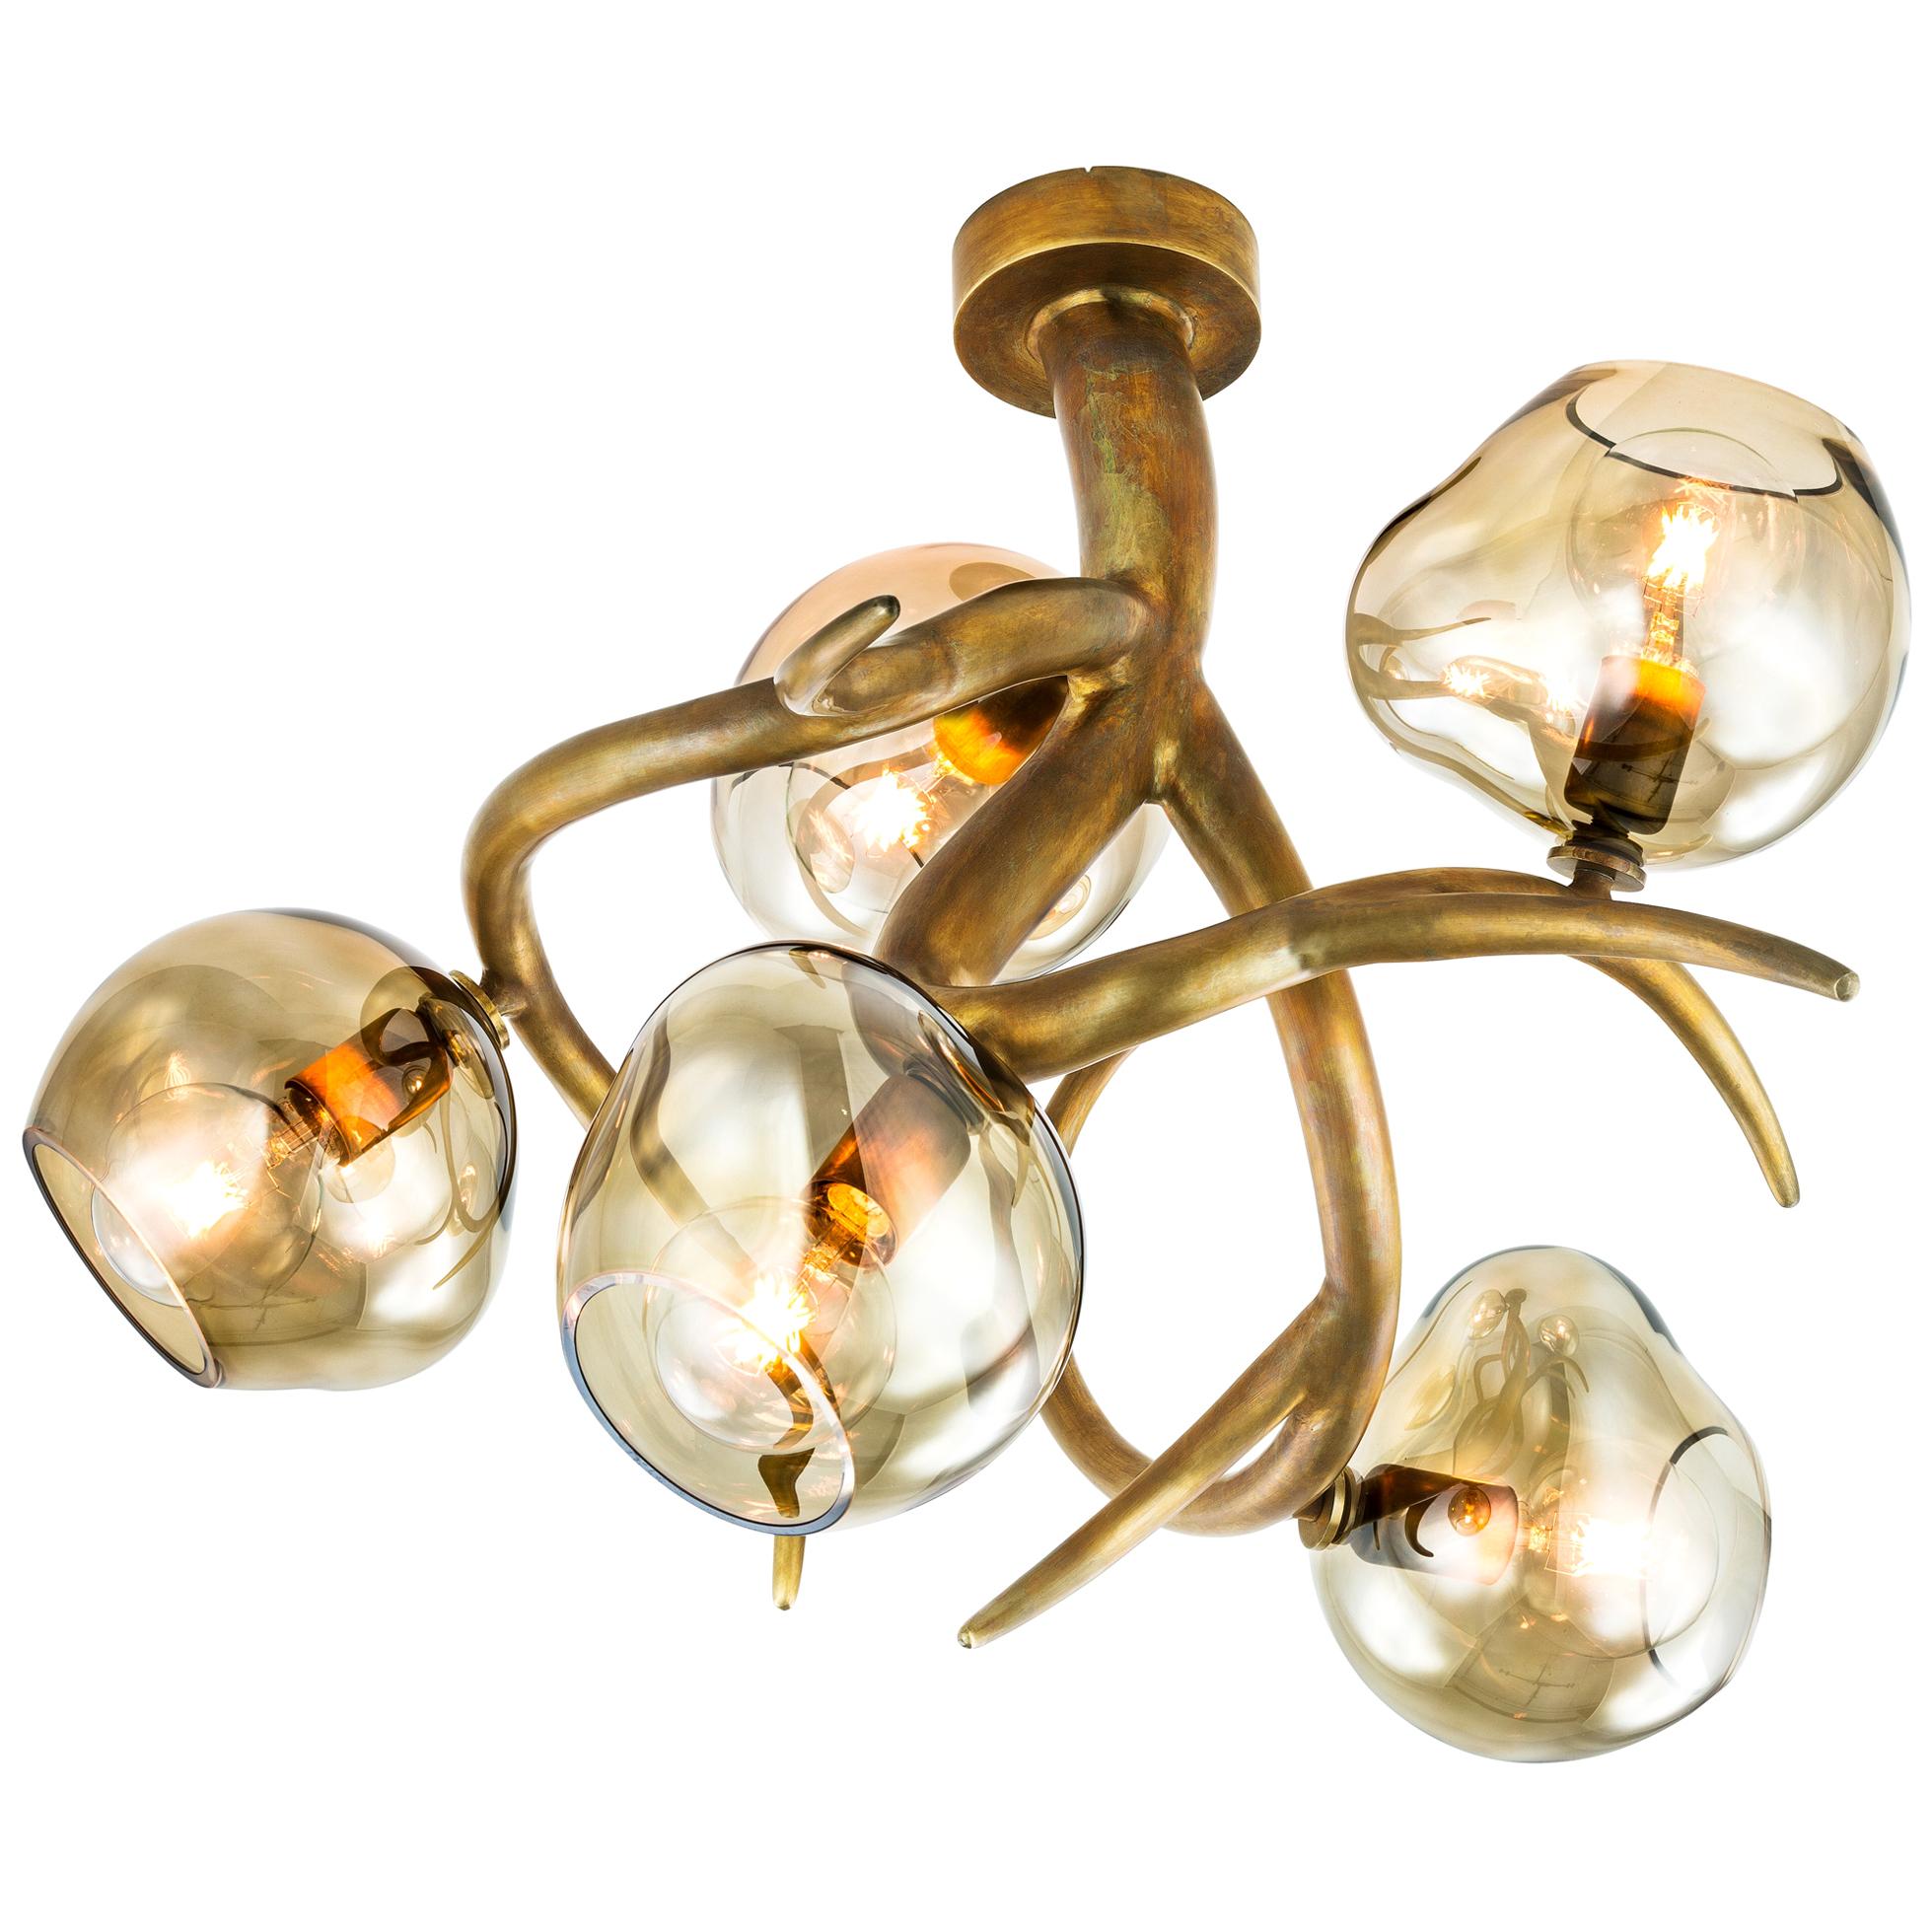 Modern Ceiling Chandelier with Colored Glass in a Brass Burnished Finish, Ersa For Sale